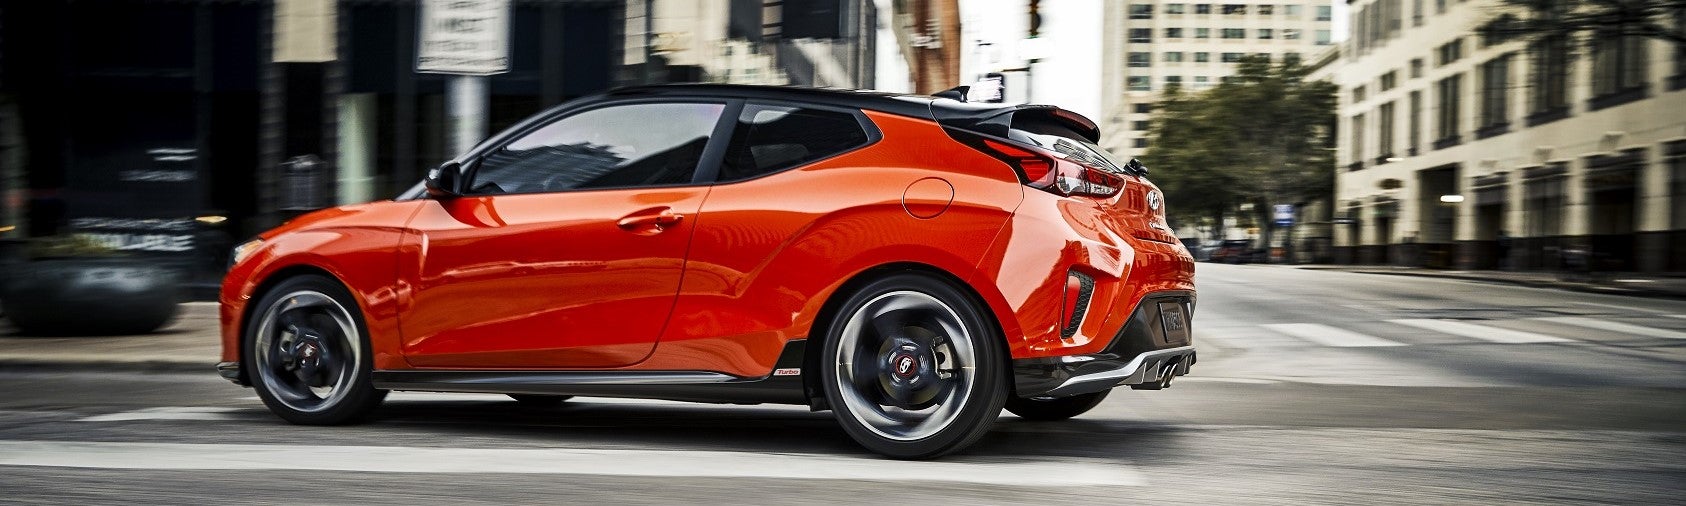 2021 Hyundai Veloster Review Bloomington IN